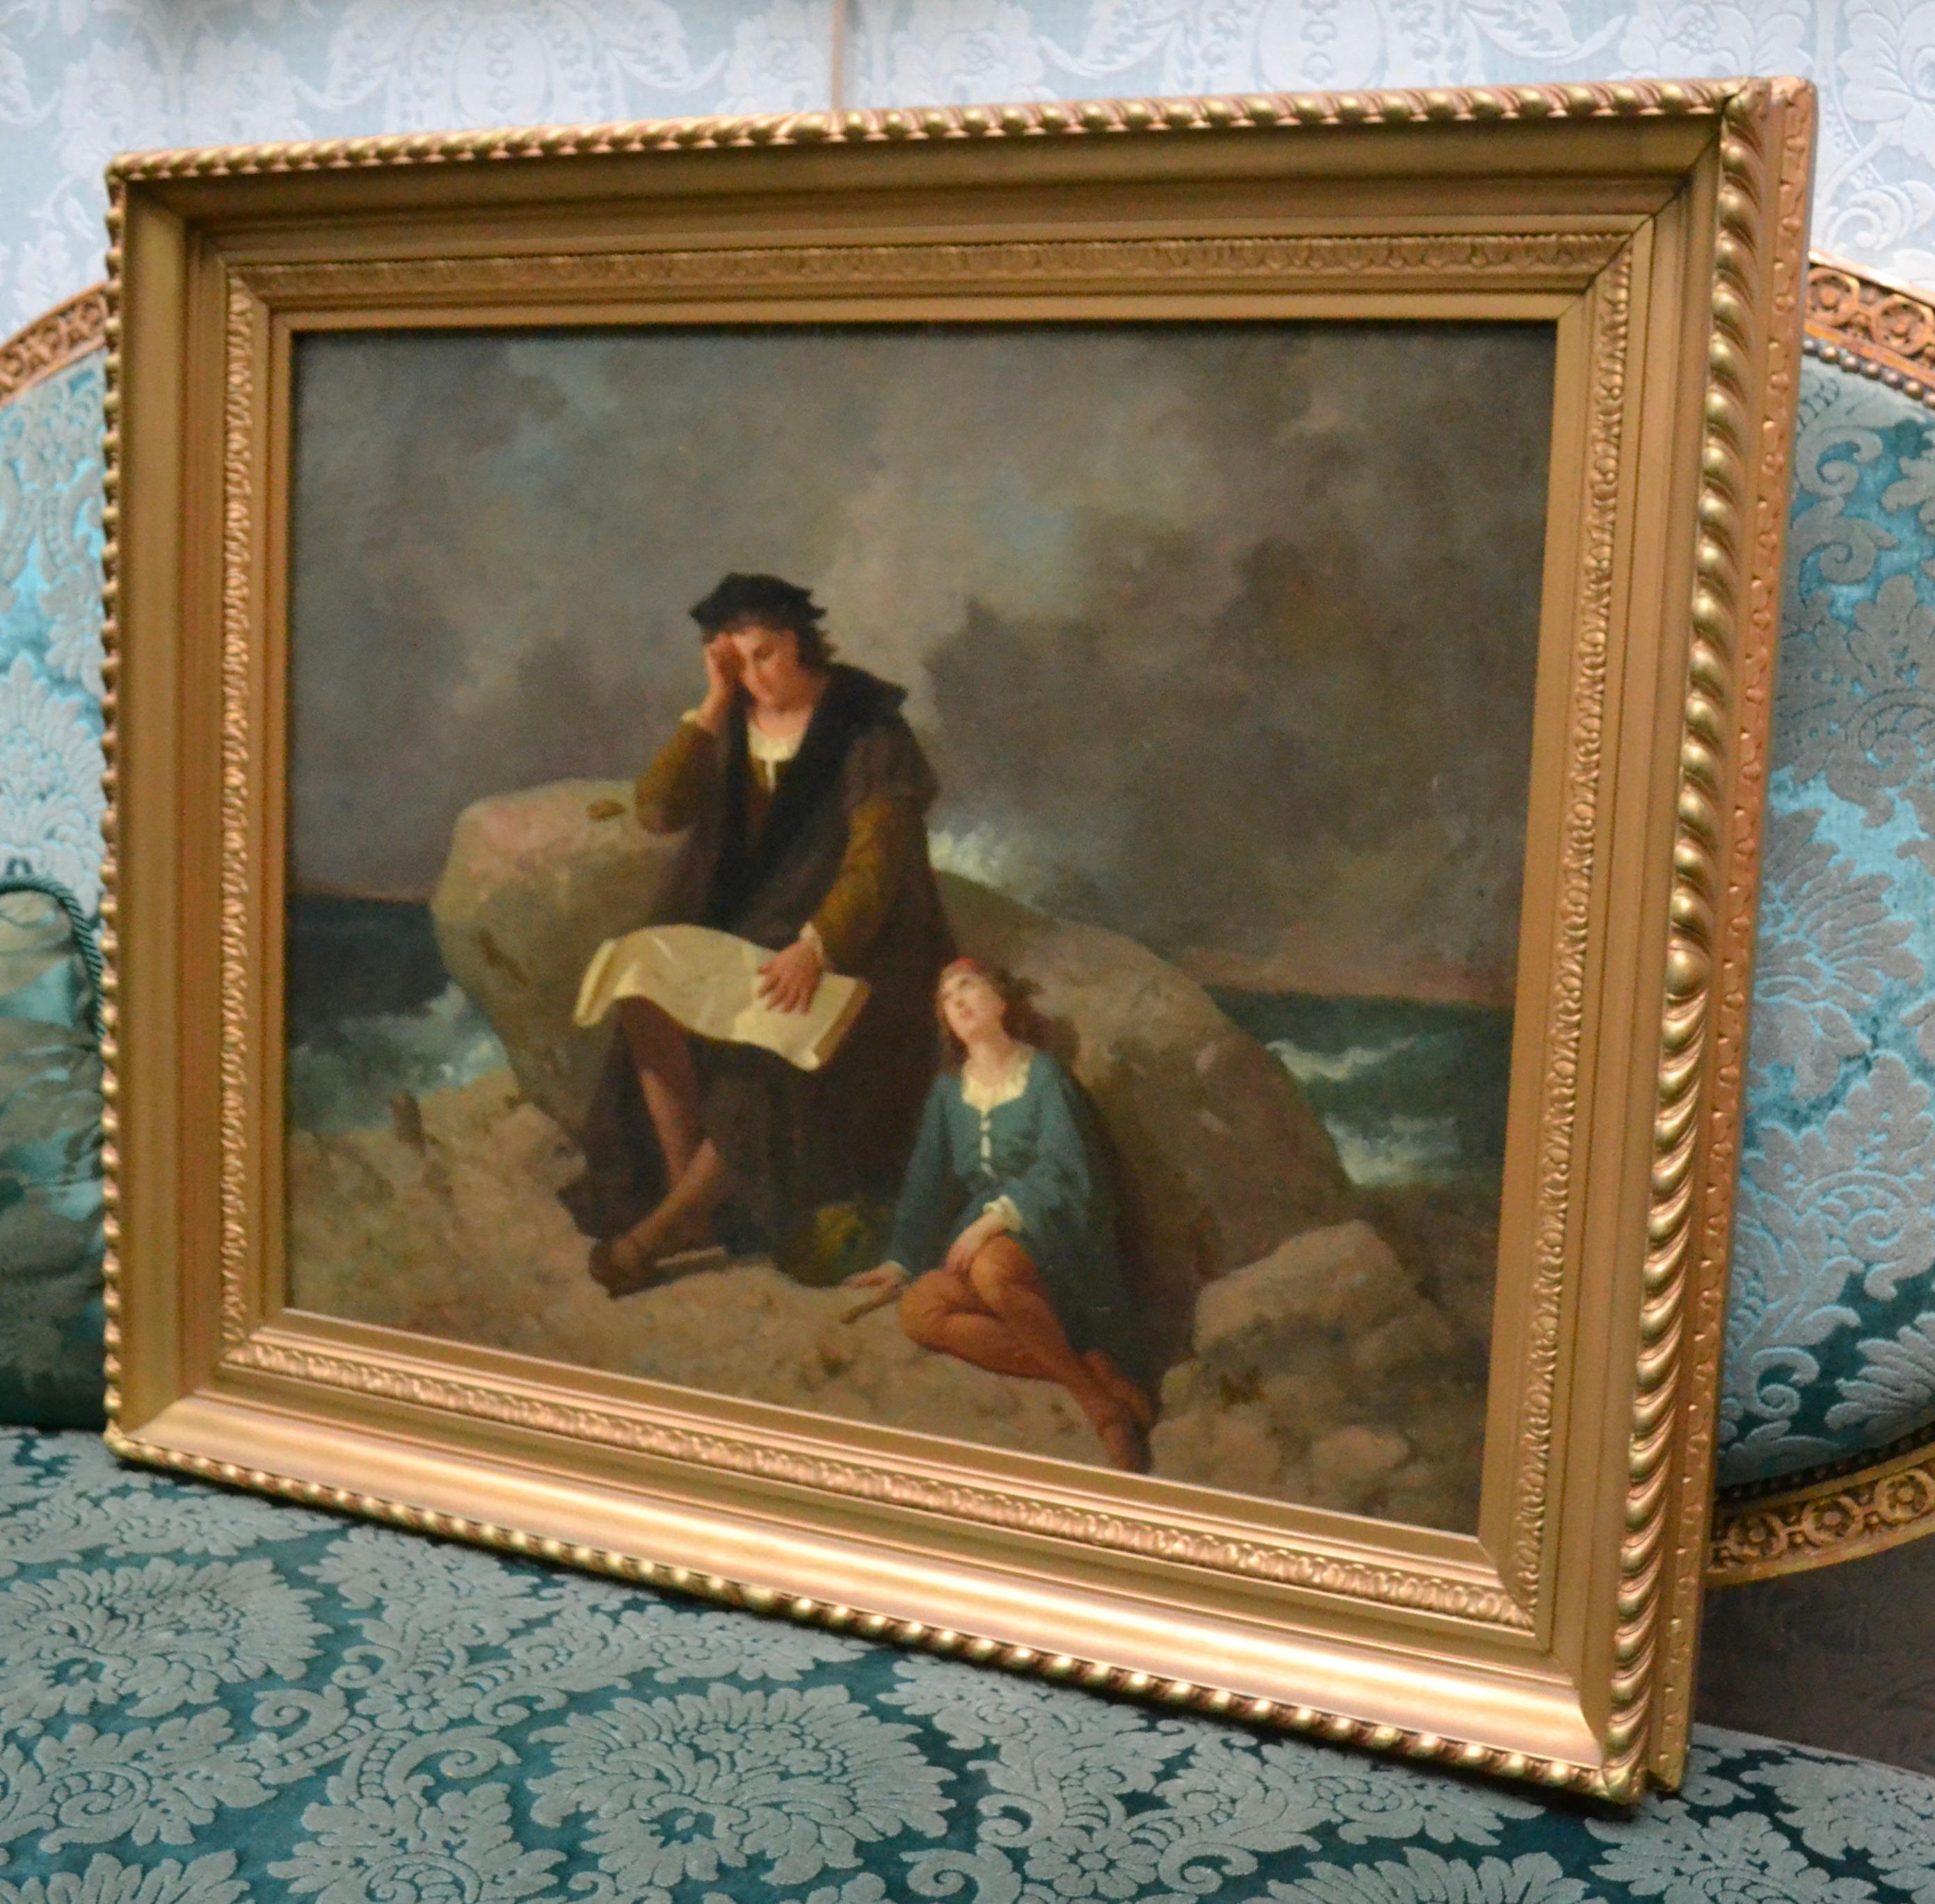 This original oil painting on canvas depicts a forlorn young couple sitting on/by a large rock at ocean's edge, either lost, shipwrecked, or possibly exploring. He gazes at a map, despondently, his compass by his elbow, and she sits at his feet